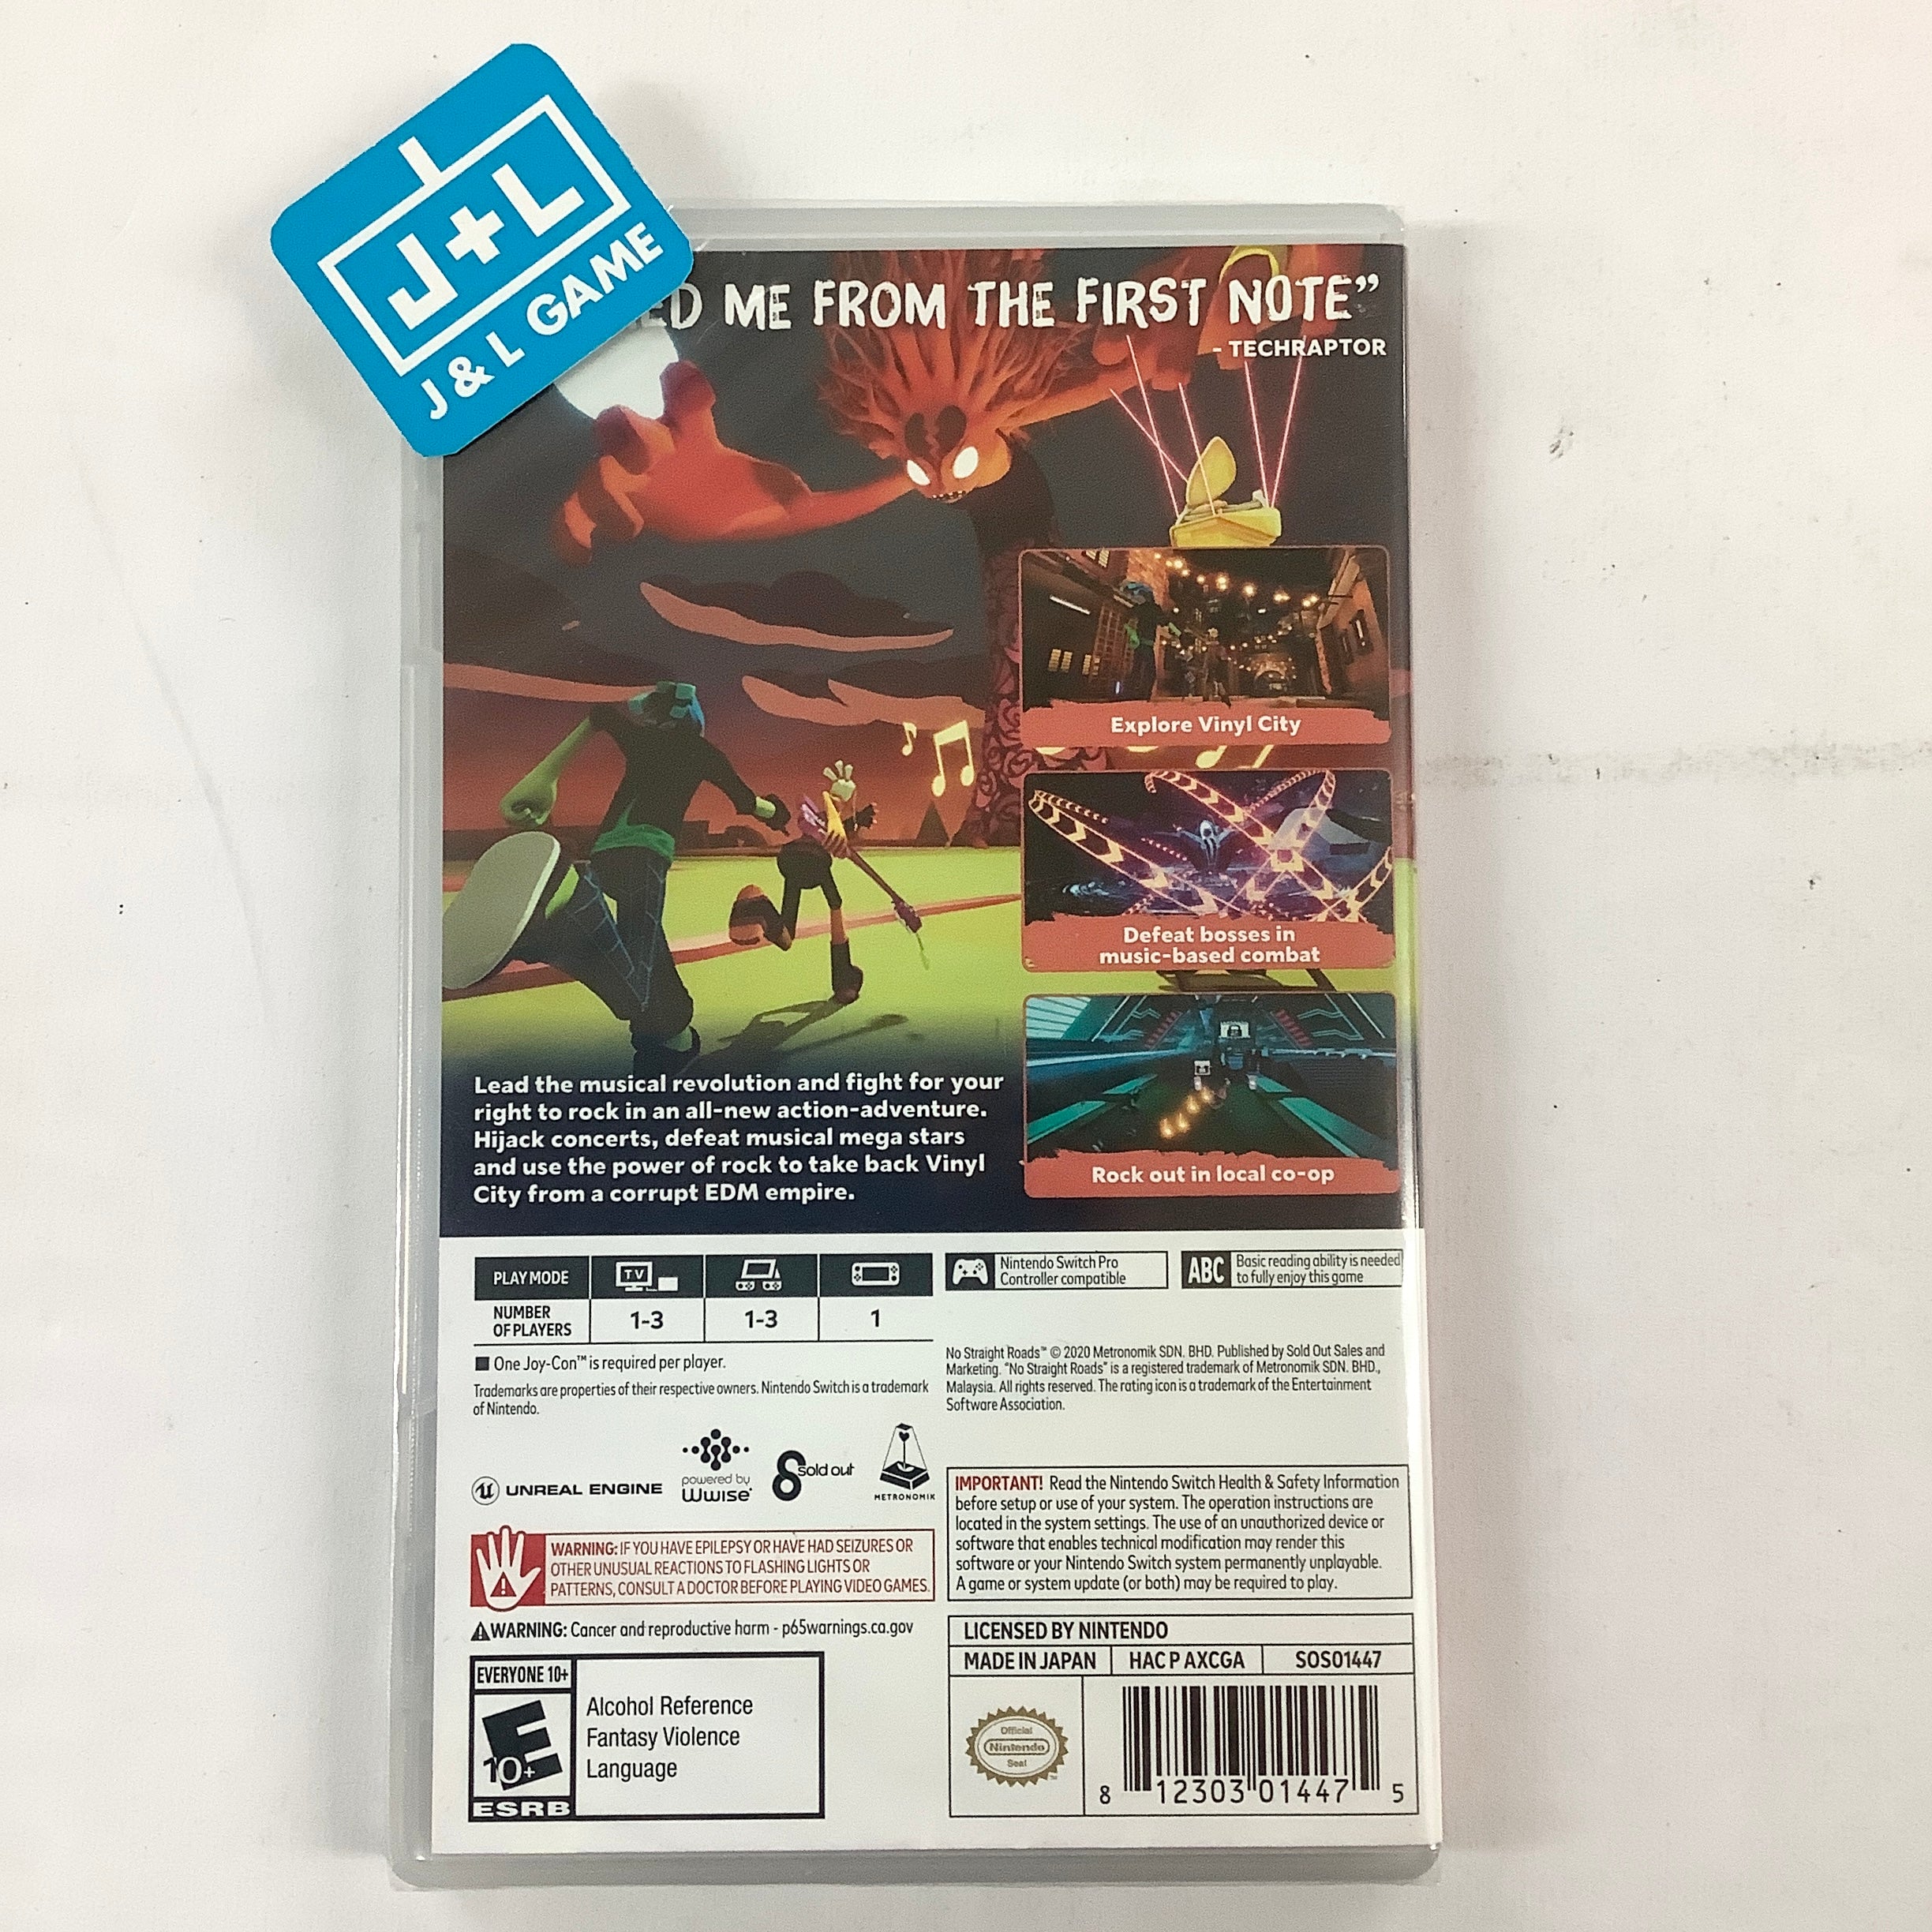 No Straight Roads - (NSW) Nintendo Switch Video Games Sold Out   